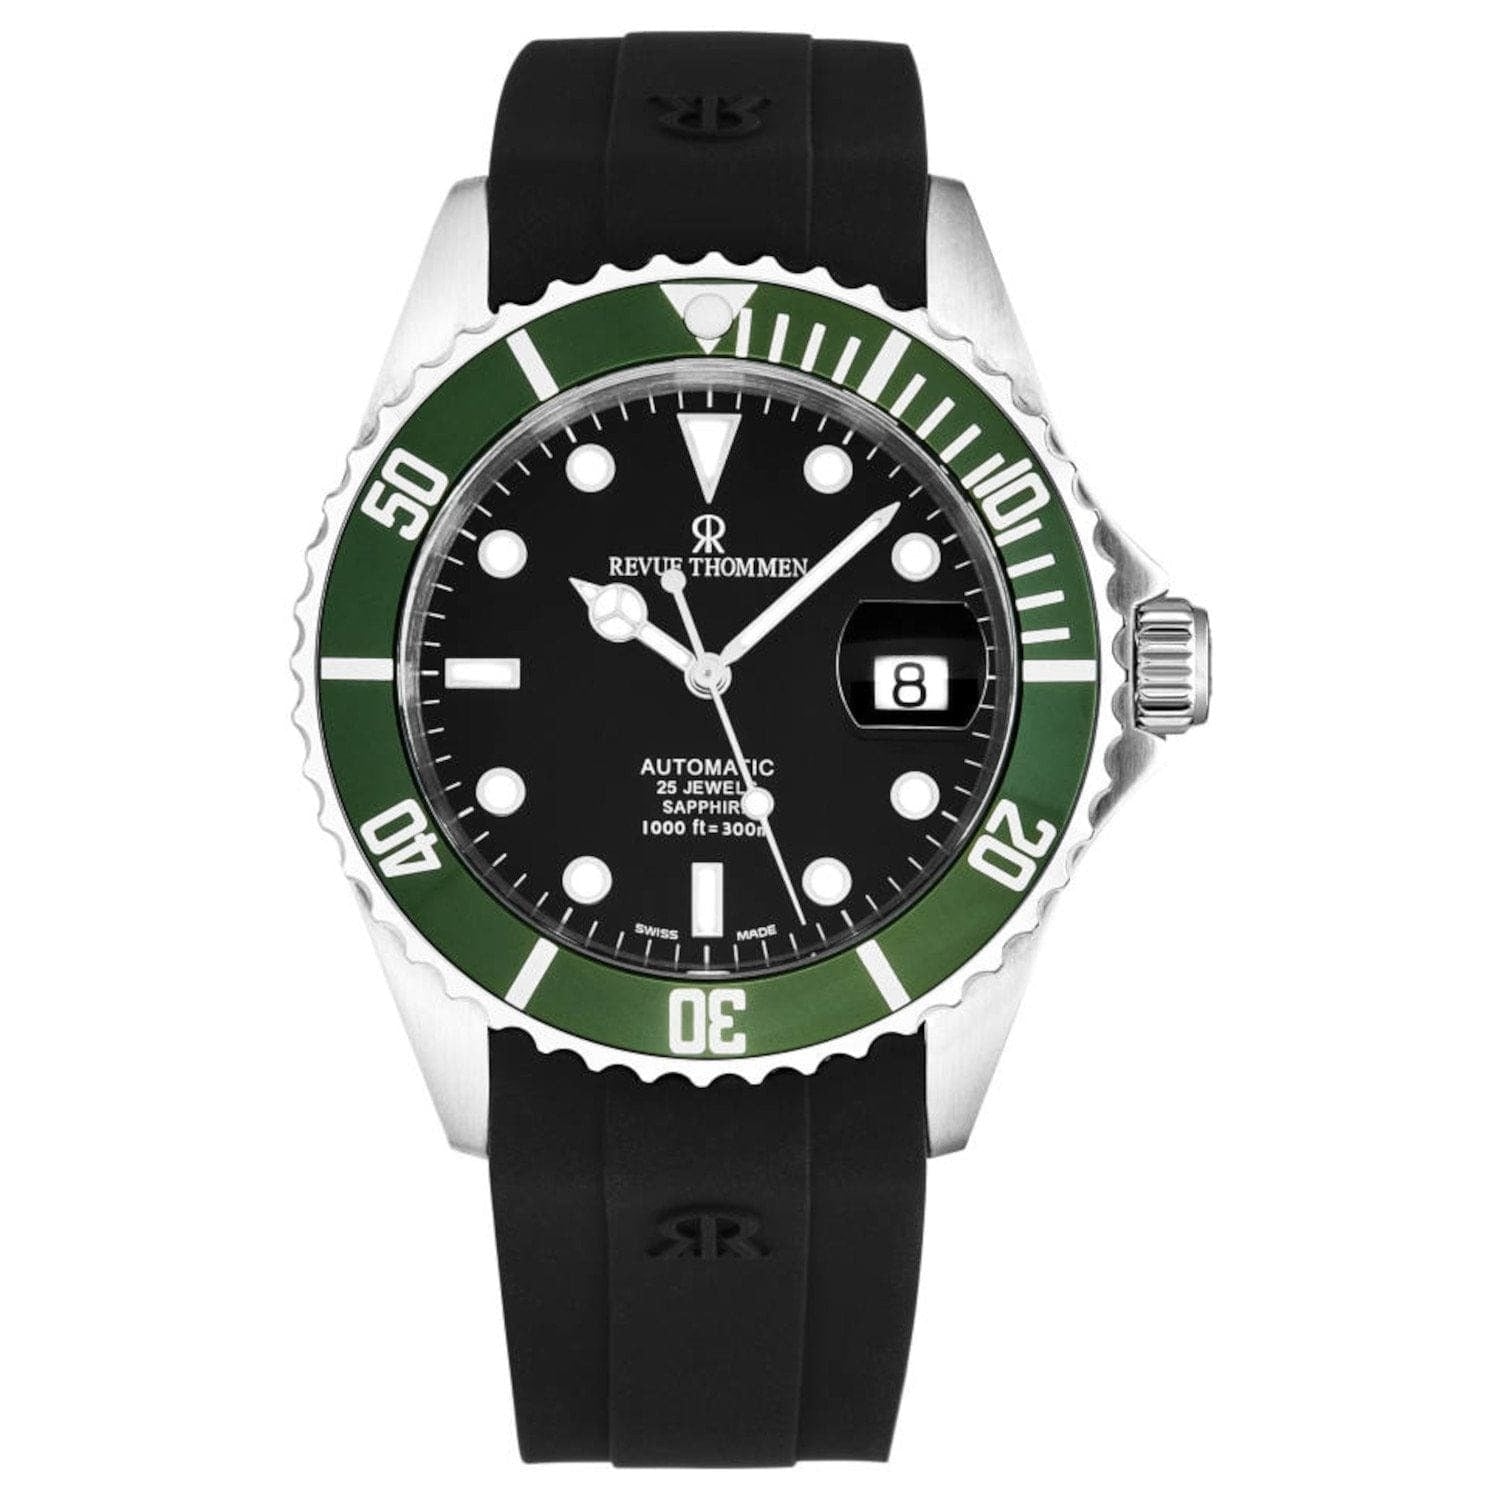 A Revue Thommen 17571.2834 men's 'Diver' Black Dial Rubber Strap Swiss Automatic Watch, featuring a sleek black and green design, showcased against a clean white background.